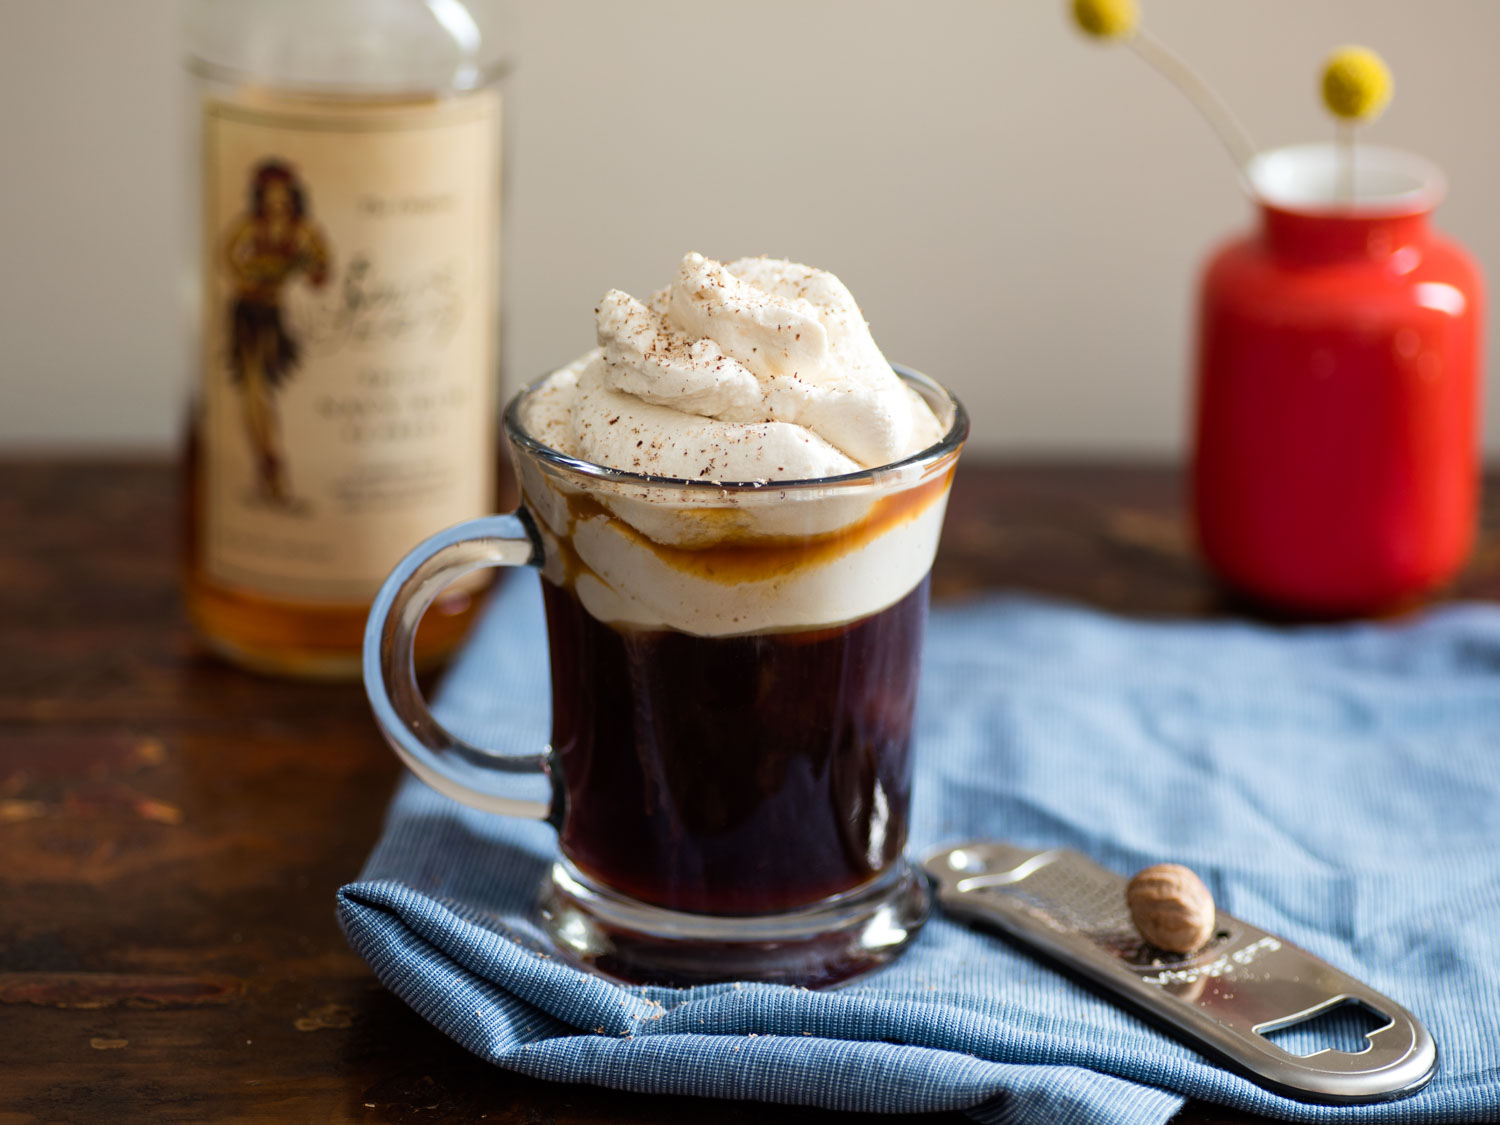 Whiskey adds a different dimension to the Irish Coffee